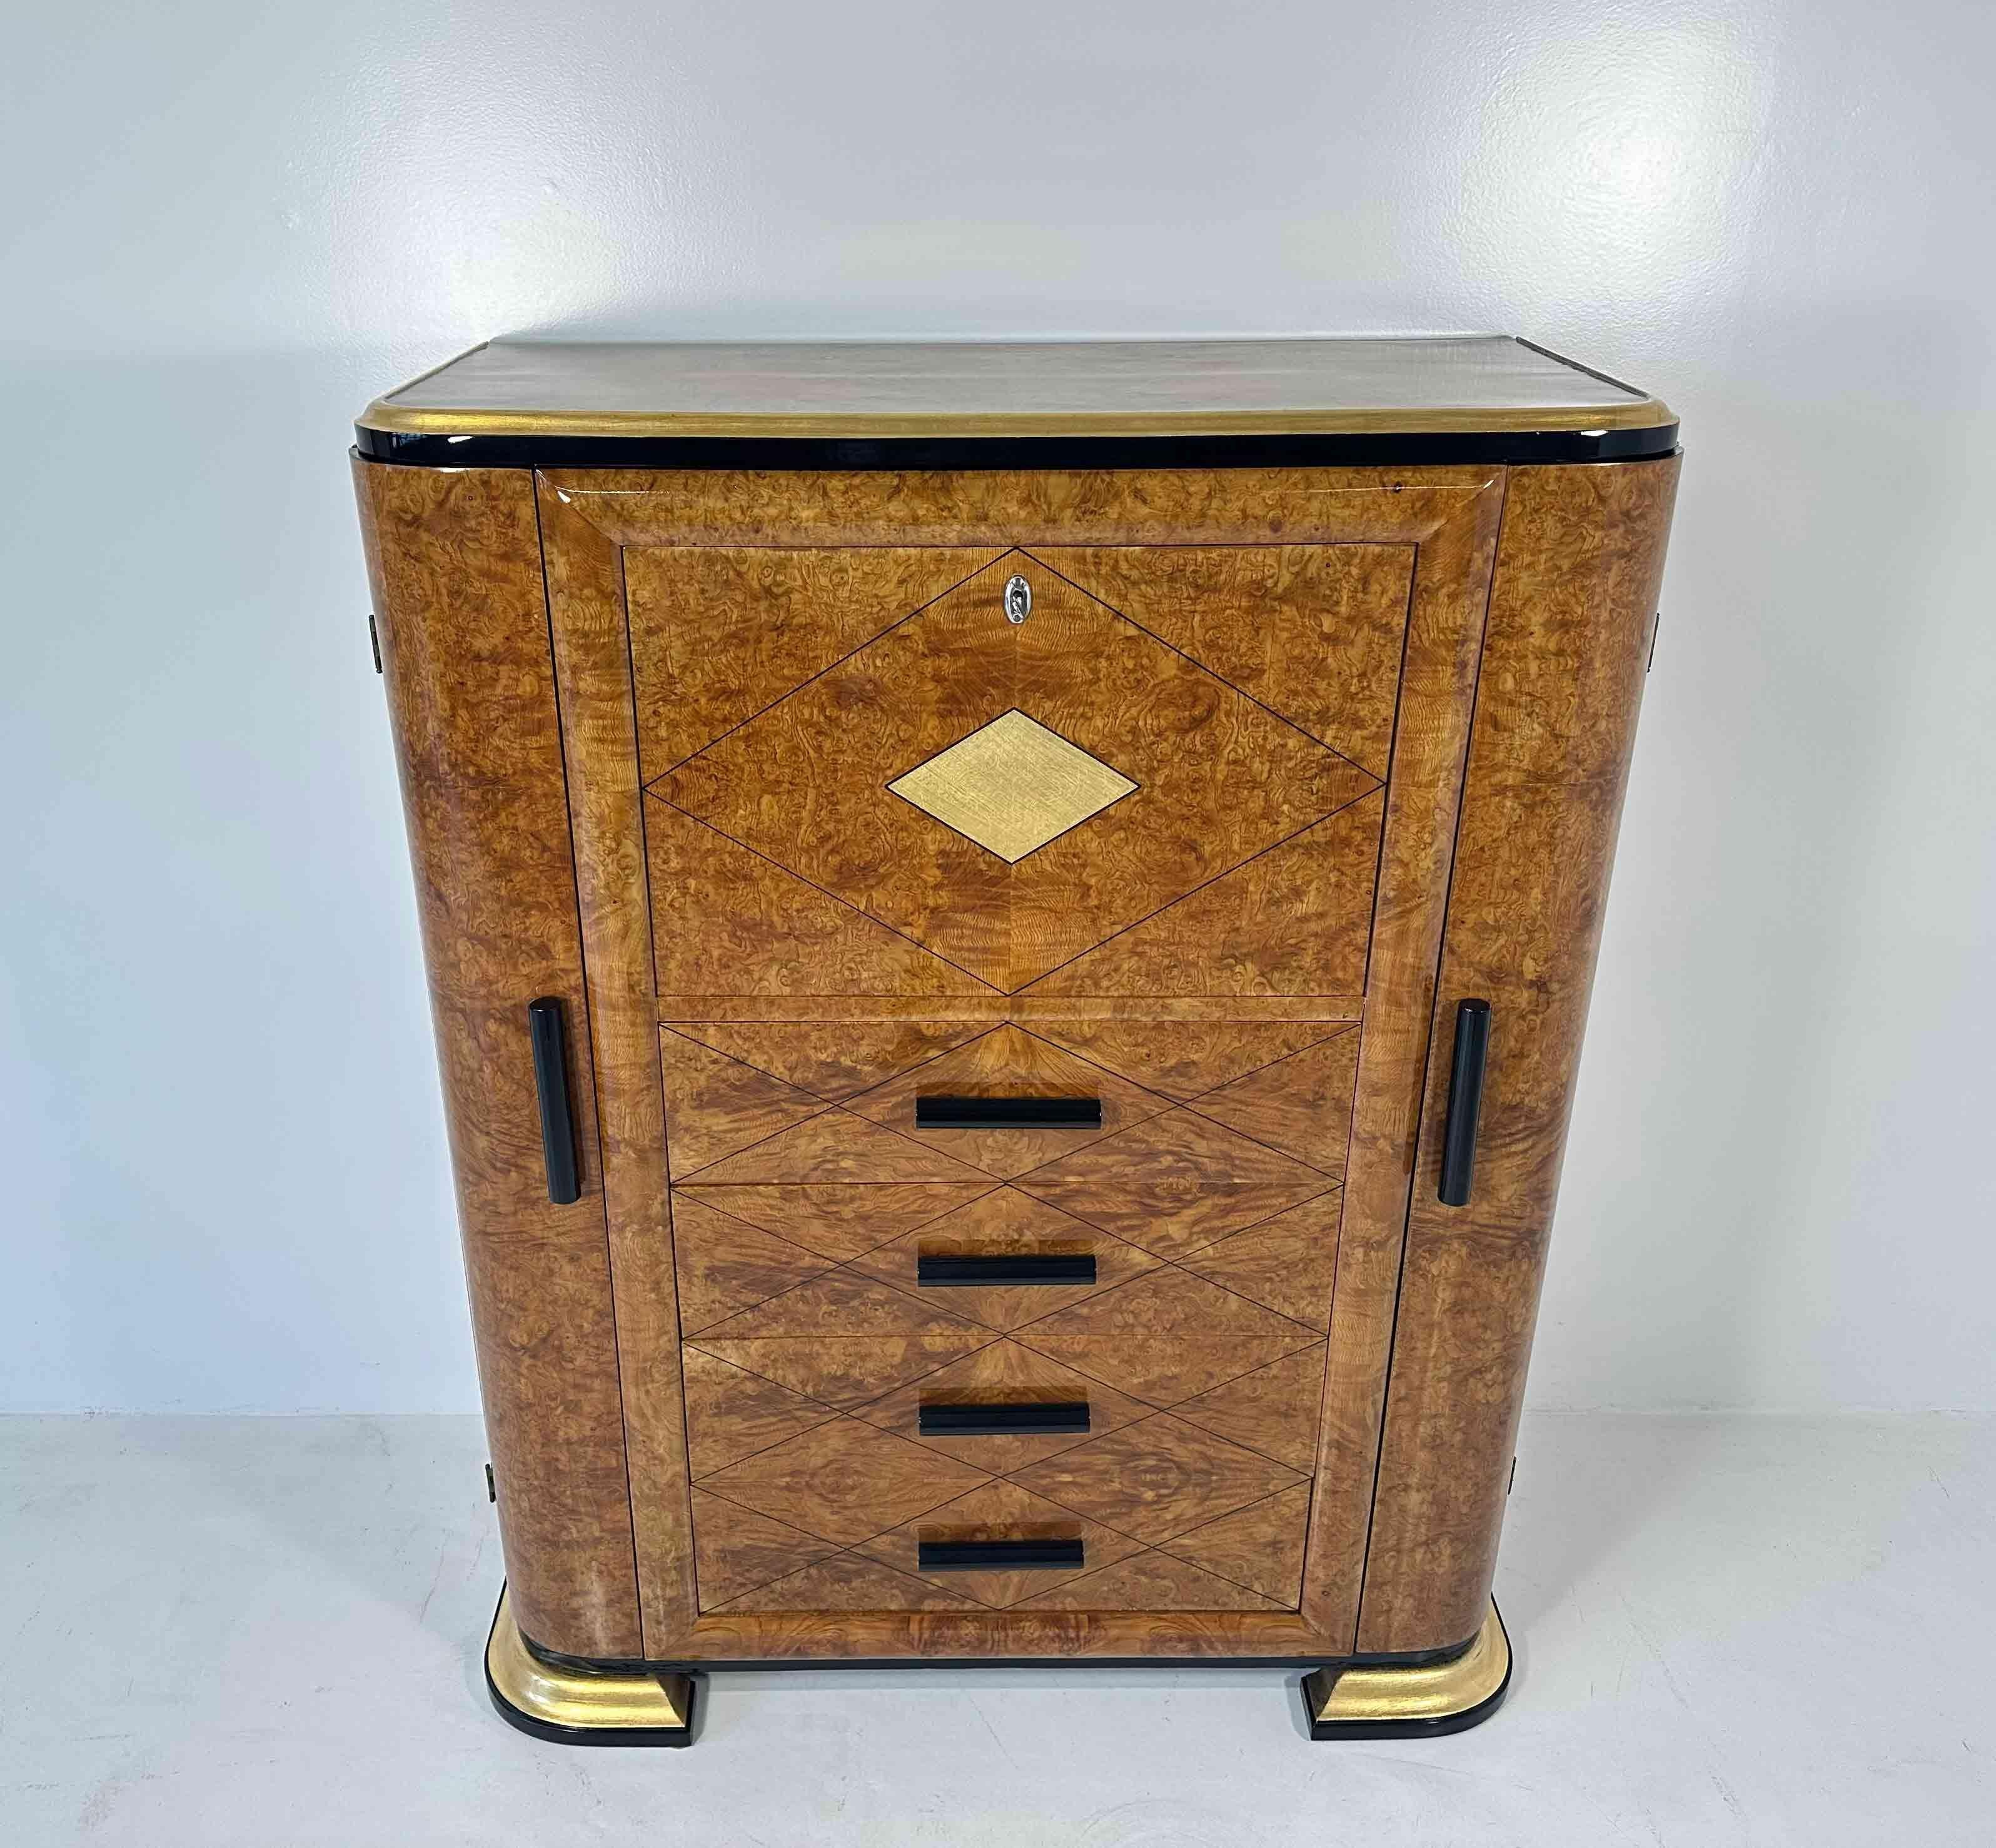 This Art Deco secrétaire was produced in Italy in the 1940s. 
It is completely made of an elegant maple briar, with black lacquered and gold leafed details. 
In particular, some of the profiles, the handles and the fine line rhomboidal decoration on